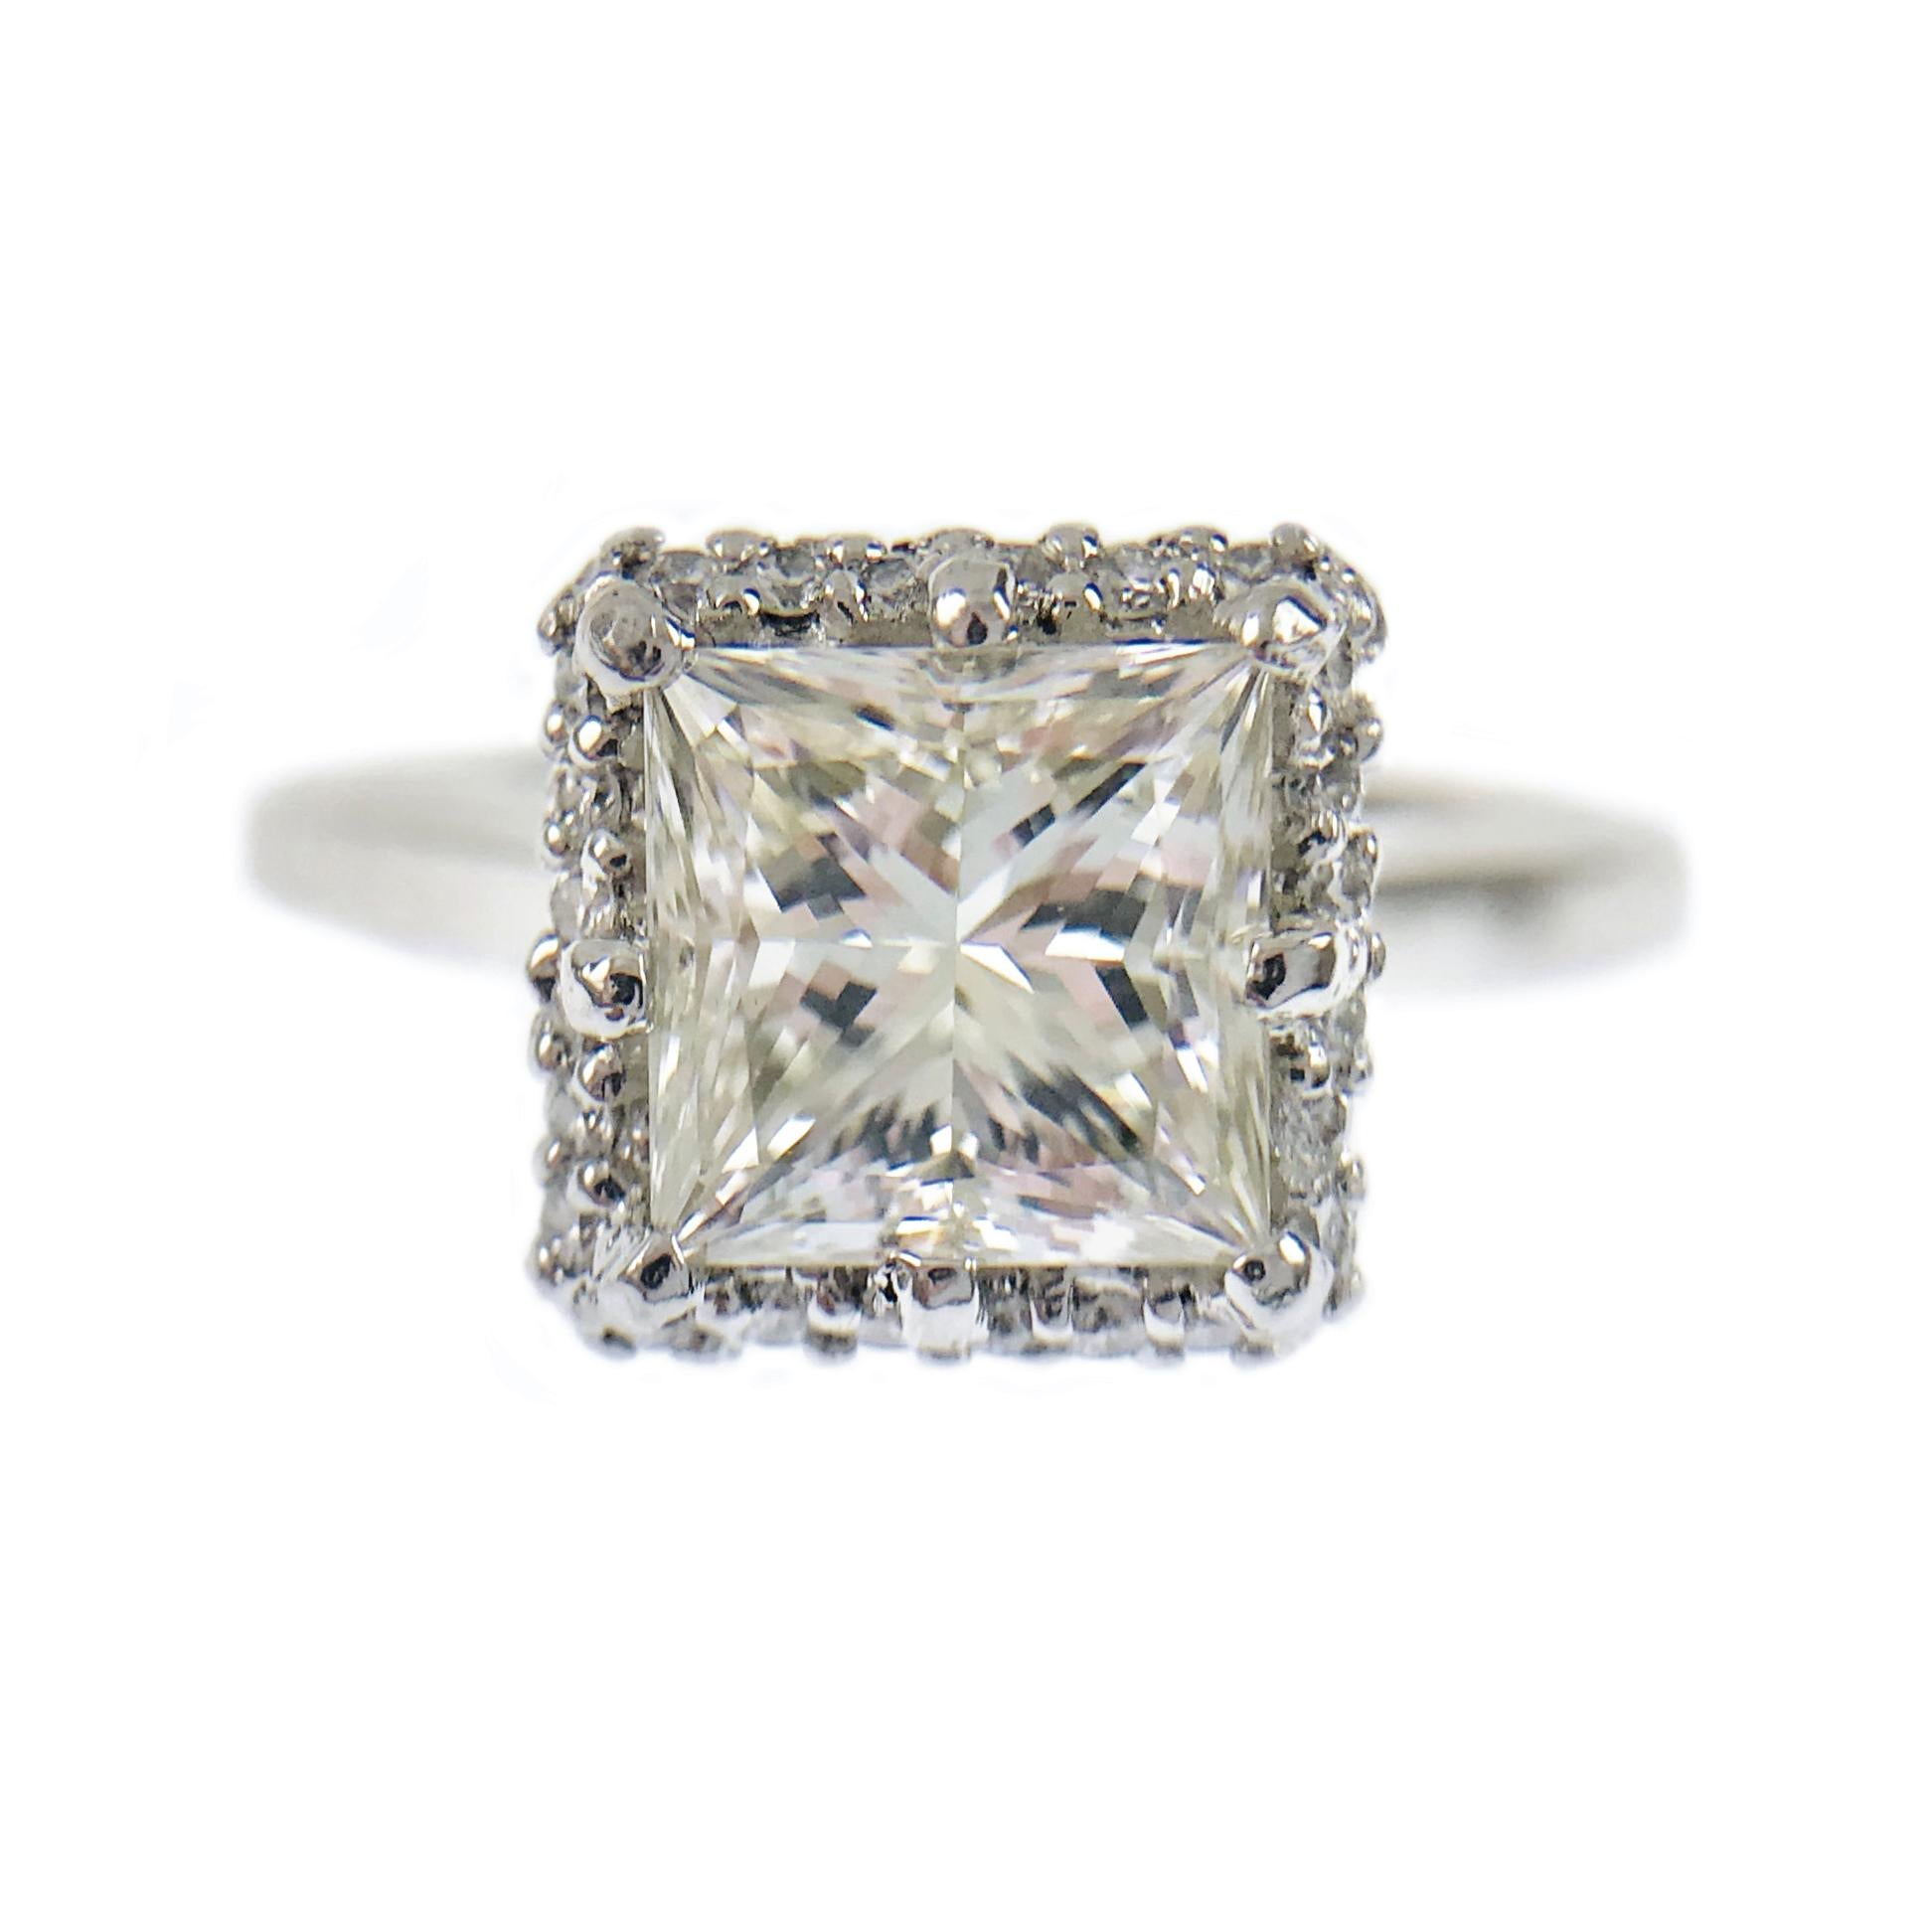 Gorgeous Tacori Platinum Princess-Cut Diamond Halo Engagement Ring. The center Diamond is GIA Certified, 1.59 carat weight. The diamond is VS1 (G.I.A.) in clarity and M (G.I.A.) in color. The ring size is 6 1/2. The total carat weight of the halo of